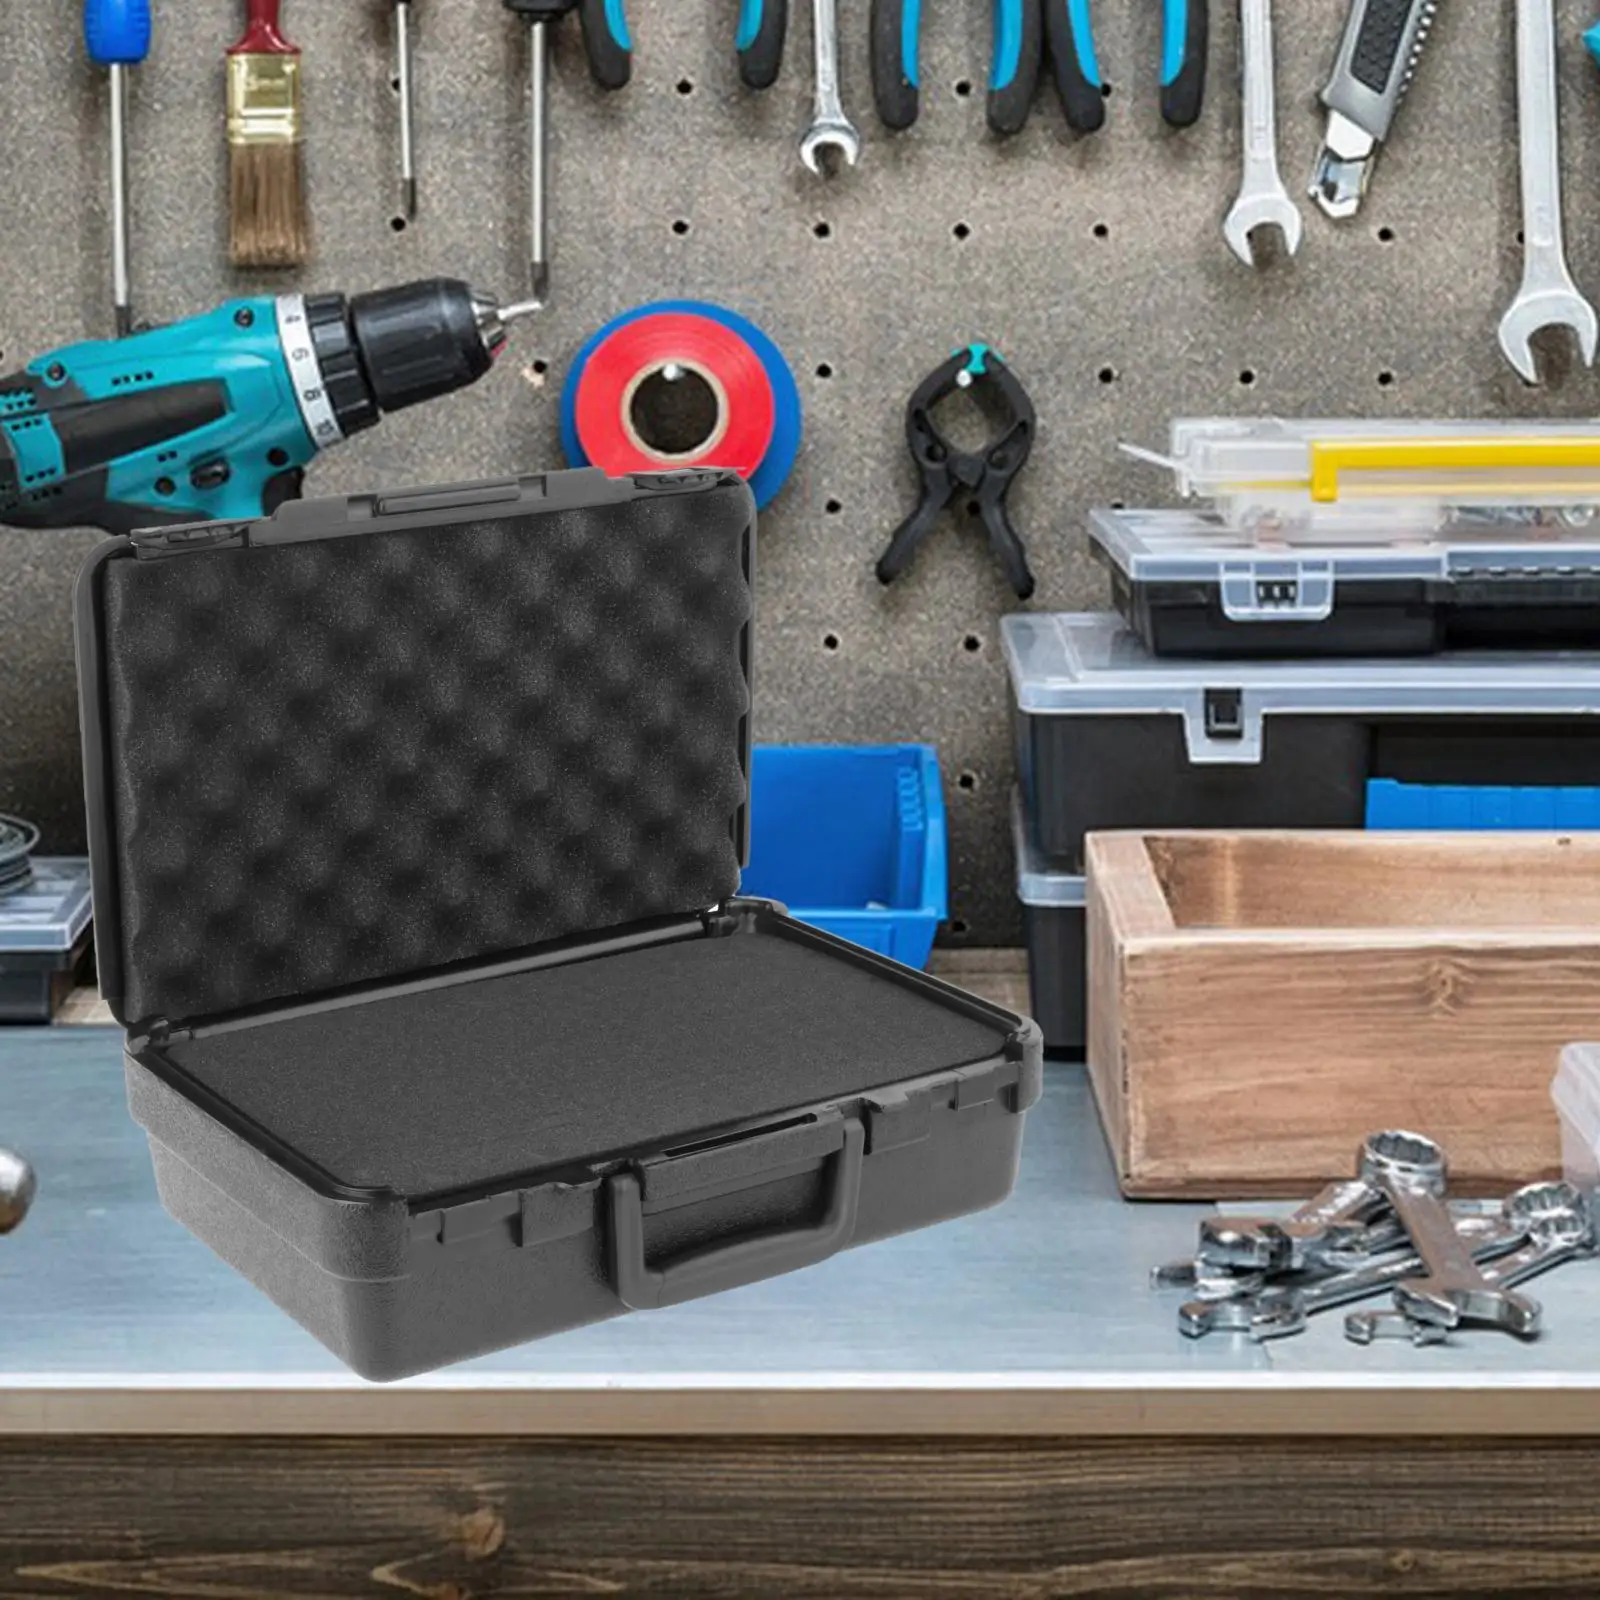 Tool Storage Box hard Case hardware Portable with Handle Multi Purpose Lightweight Sponge Interior Small for Outdoor